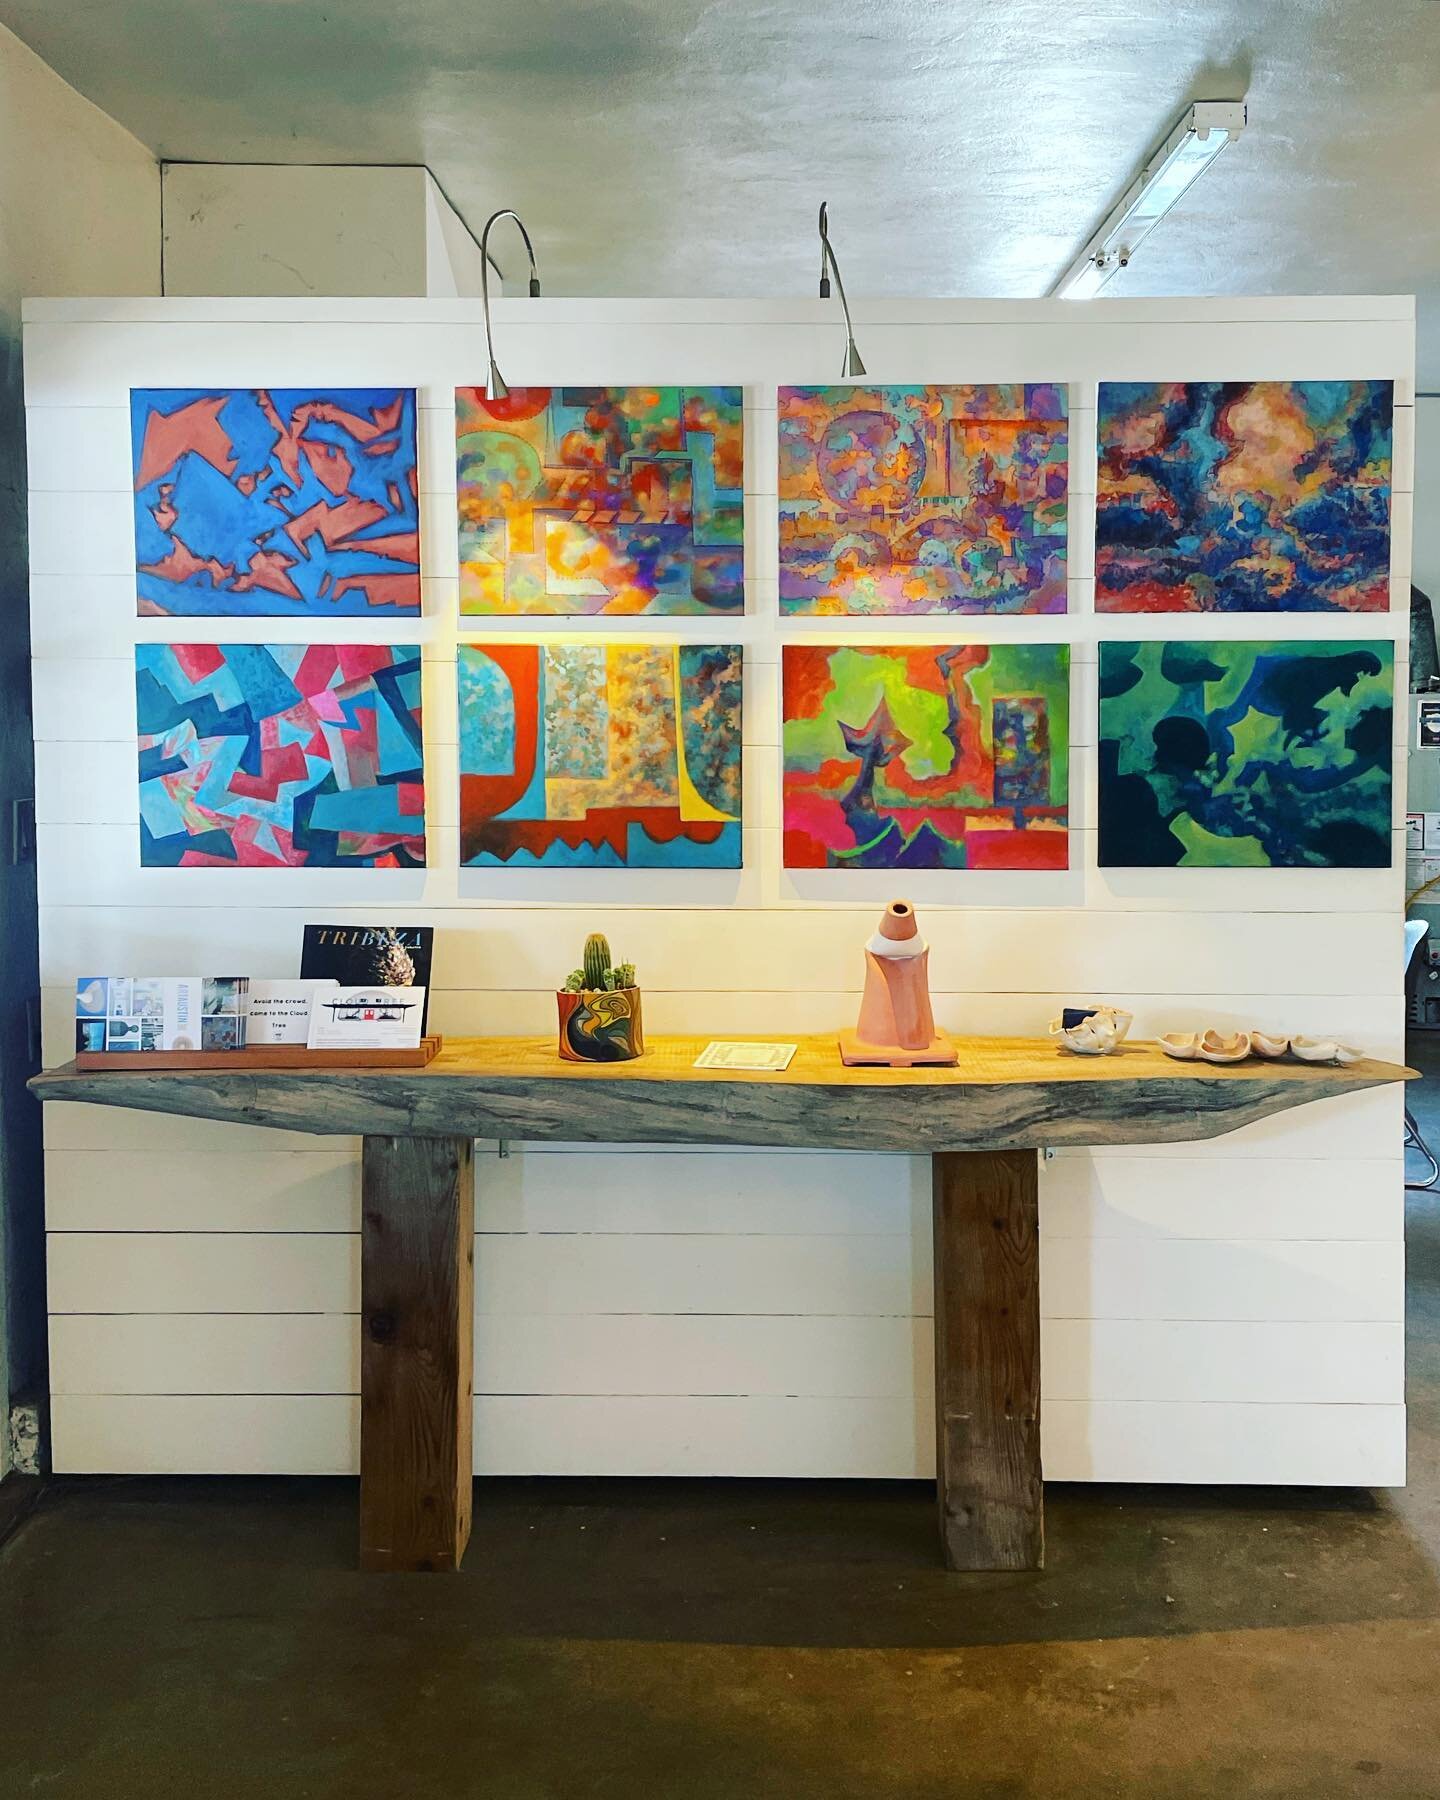 Don&rsquo;t miss a chance to visit with the amazing Phillip Trussel tonight 5/20 from 7-10. He is very special Austin artist and it&rsquo;s an honor to show 54 works by this prolific creative force ✨